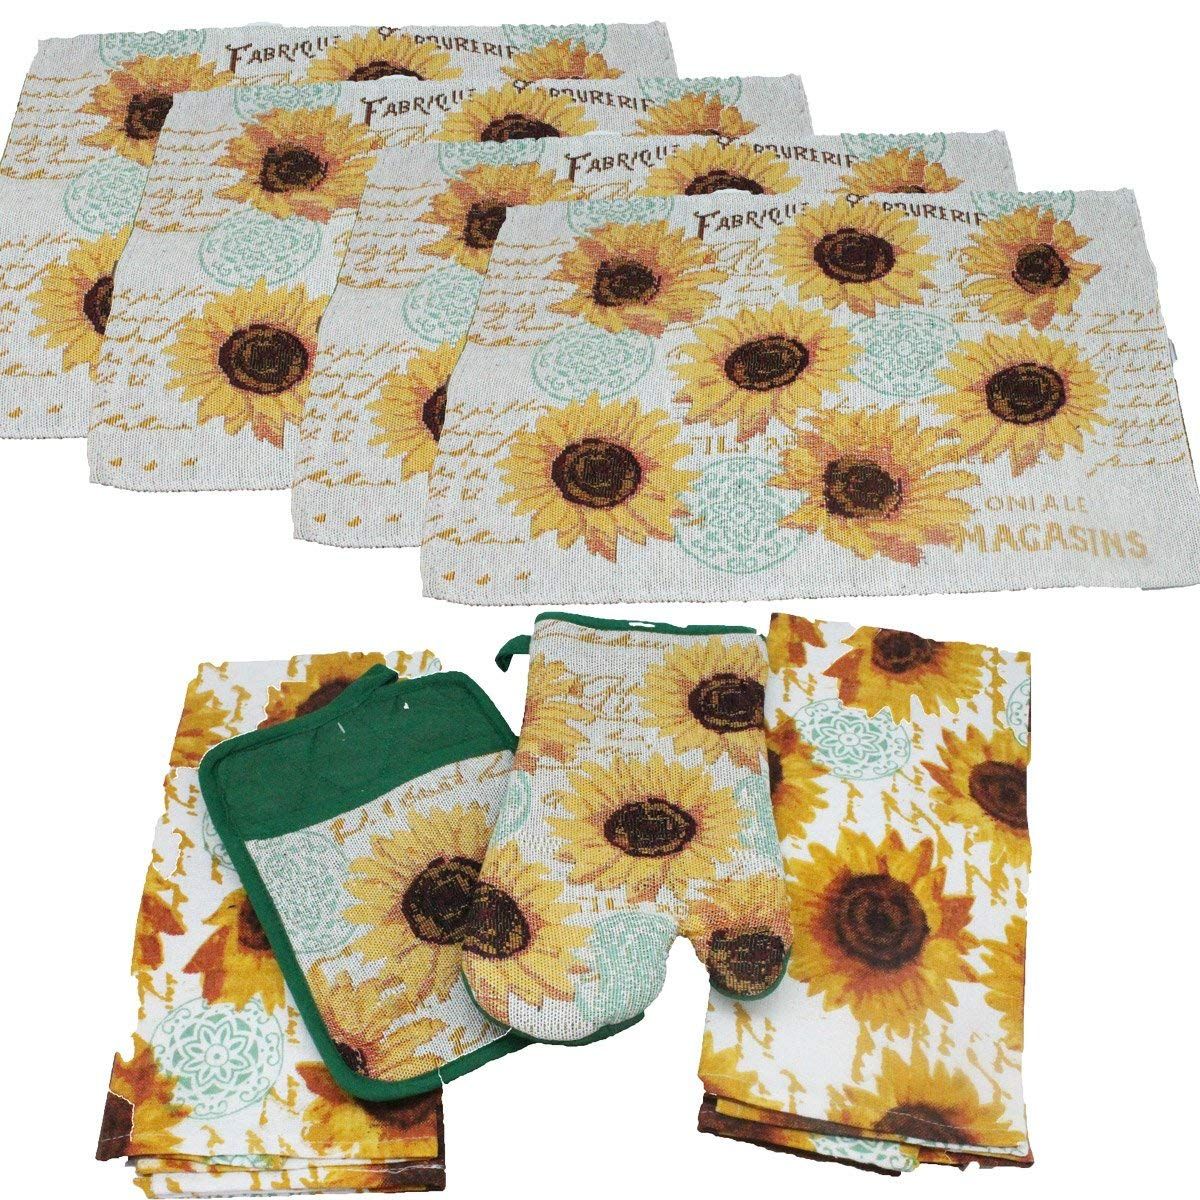 Cheap Kitchen Sunflower, Find Kitchen Sunflower Deals On Intended For Window Curtains Sets With Colorful Marketplace Vegetable And Sunflower Print (Photo 18 of 20)